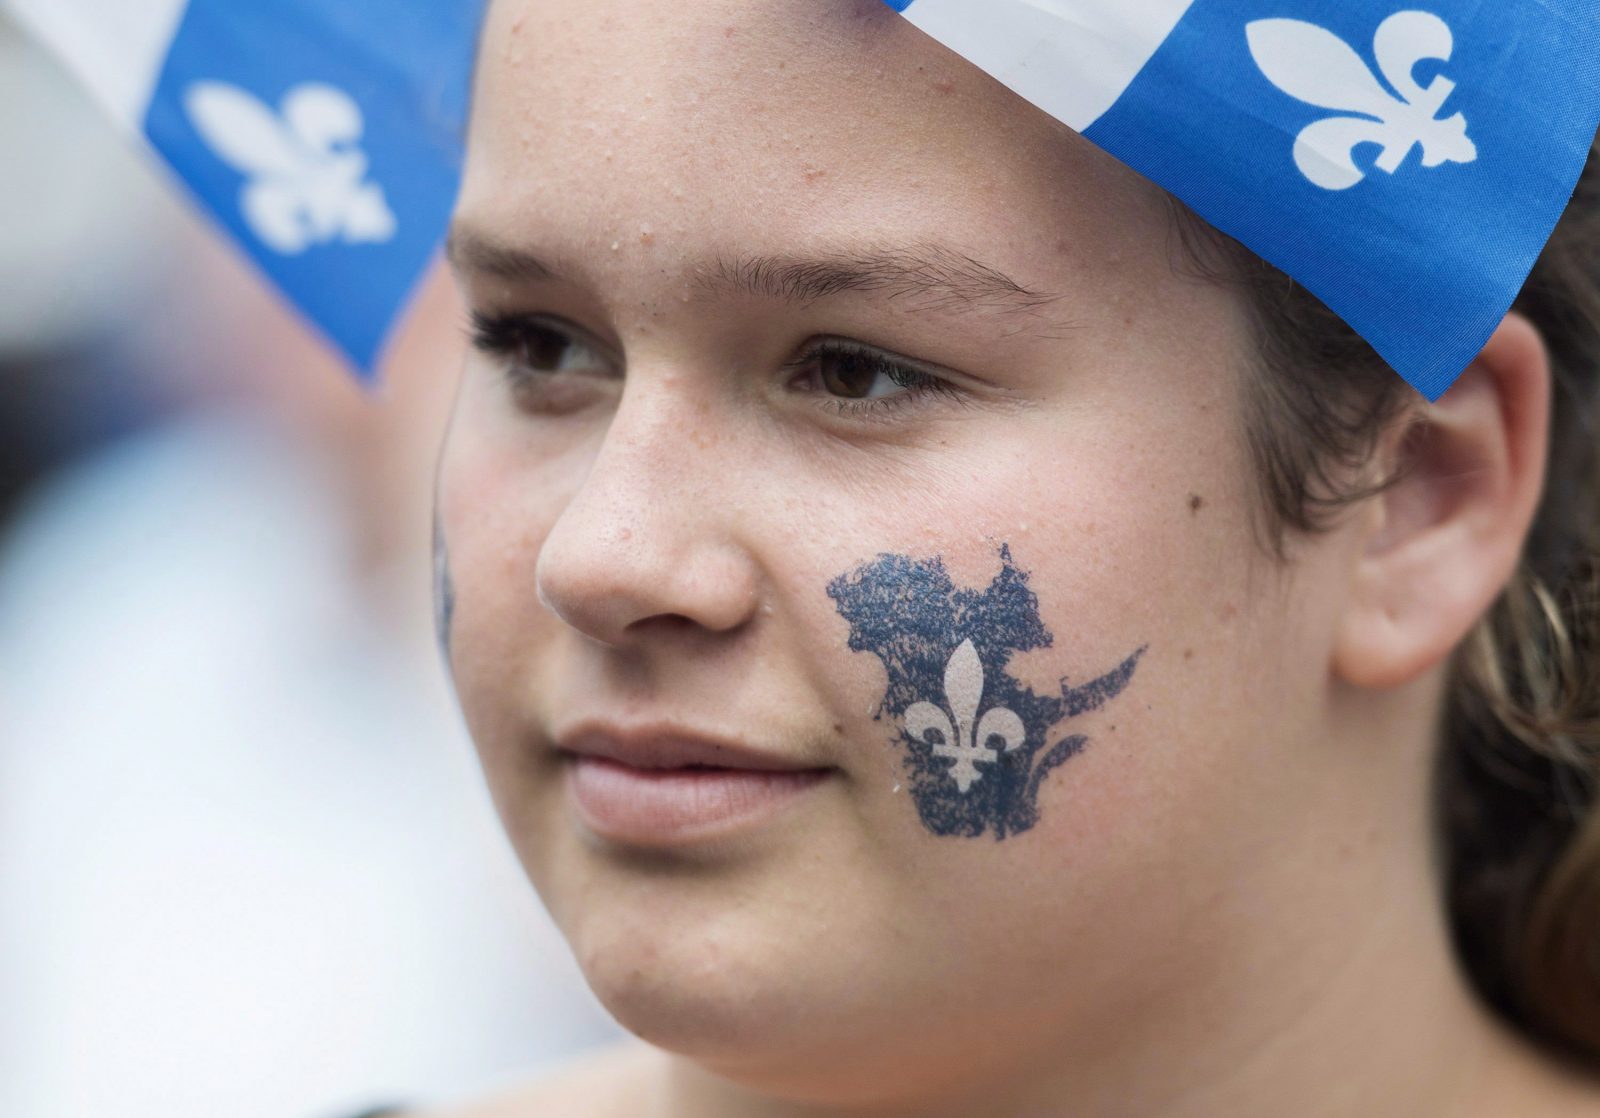 Saint-Jean-Baptiste Day: Friends, family, and community